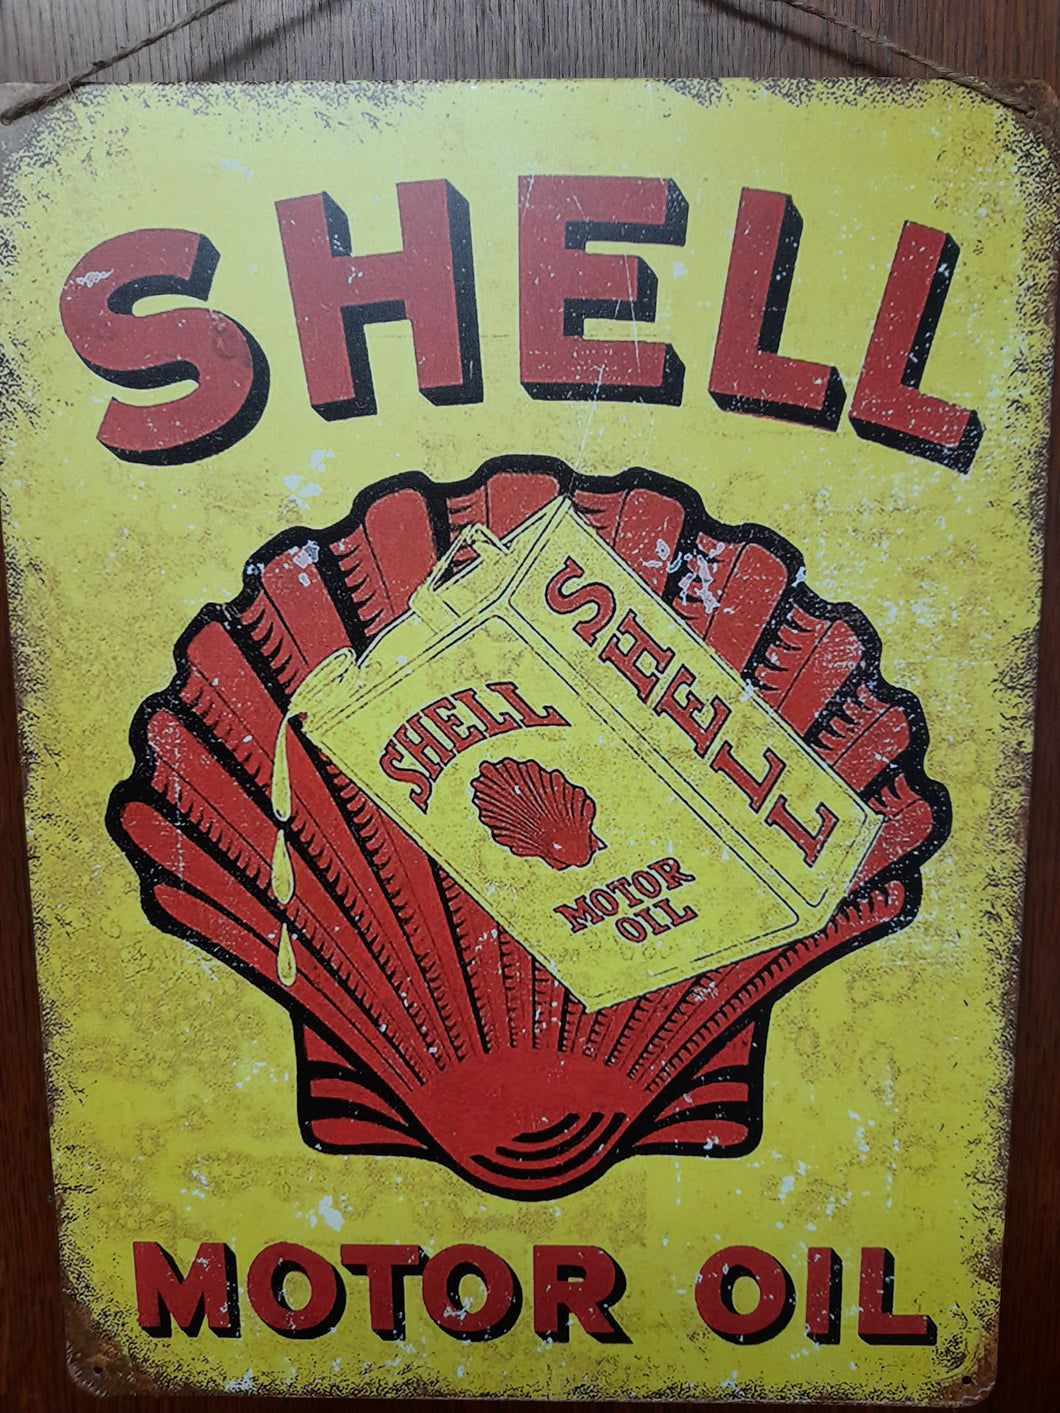 Shell Motor oil vintage style metal sign